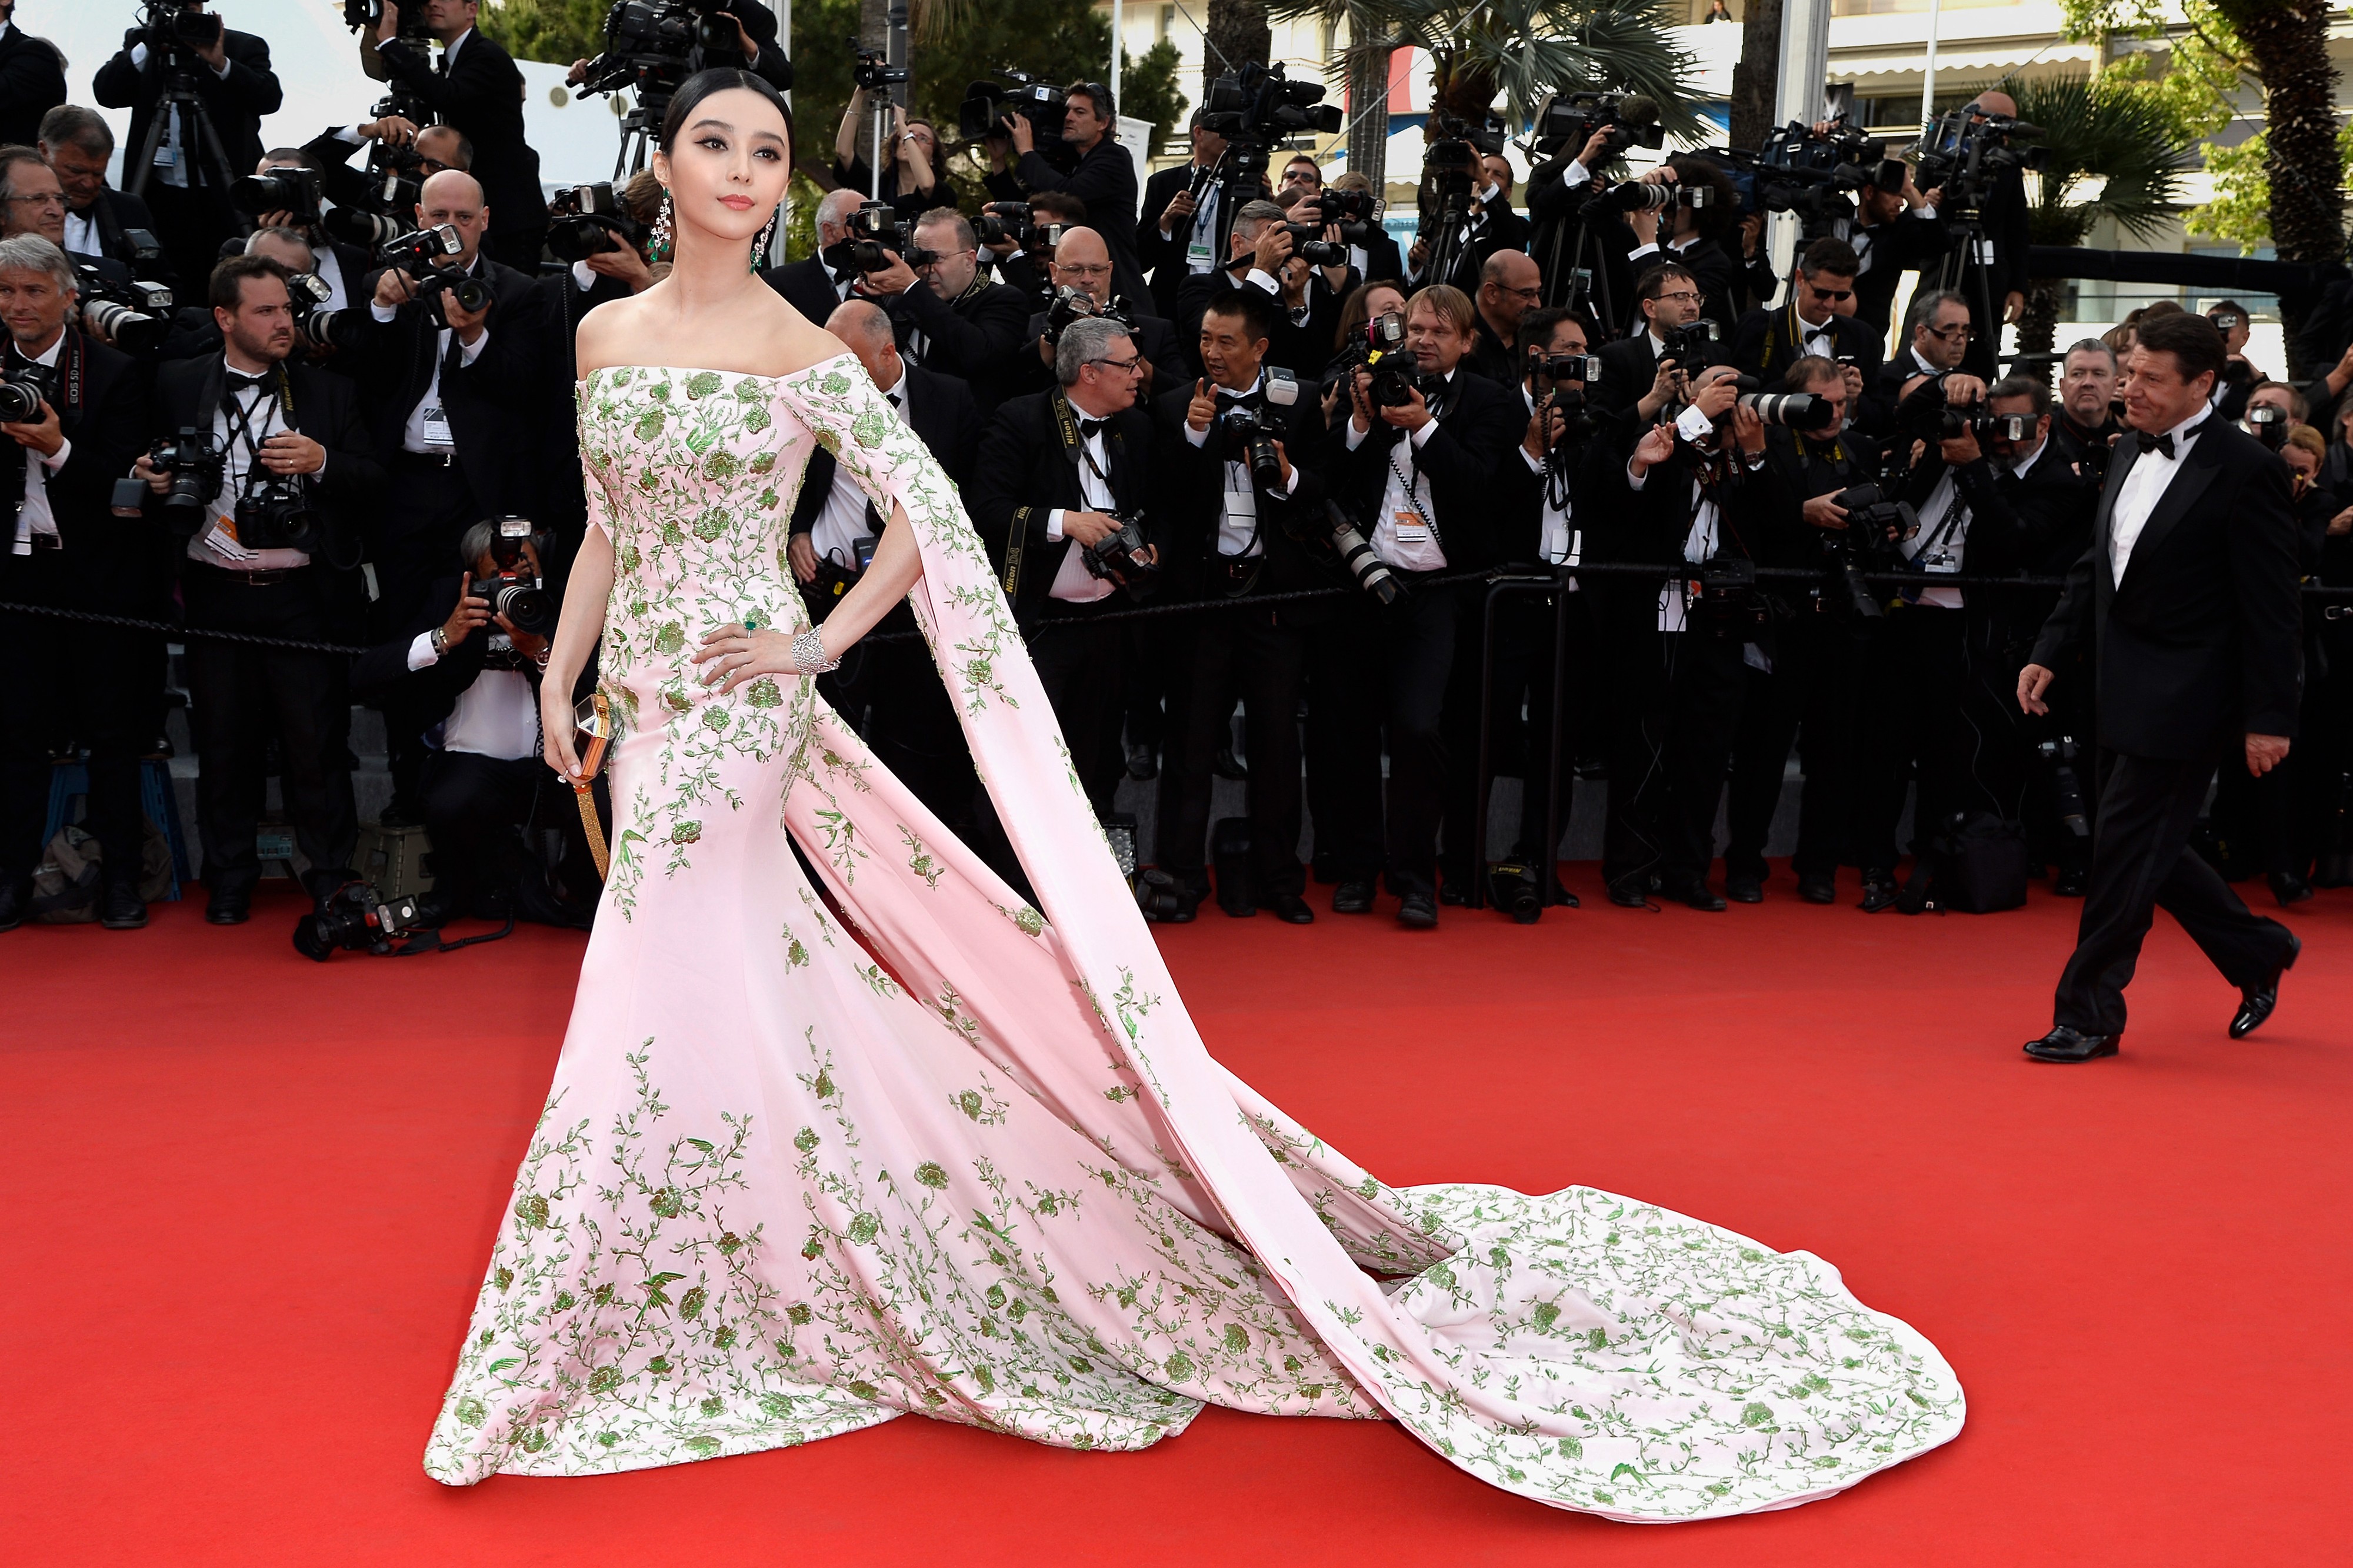 Fan Bingbing attends a red carpet event at the 68th annual Cannes Film Festival. Styled by Min Rui. Photo: Pascal Le Segretain